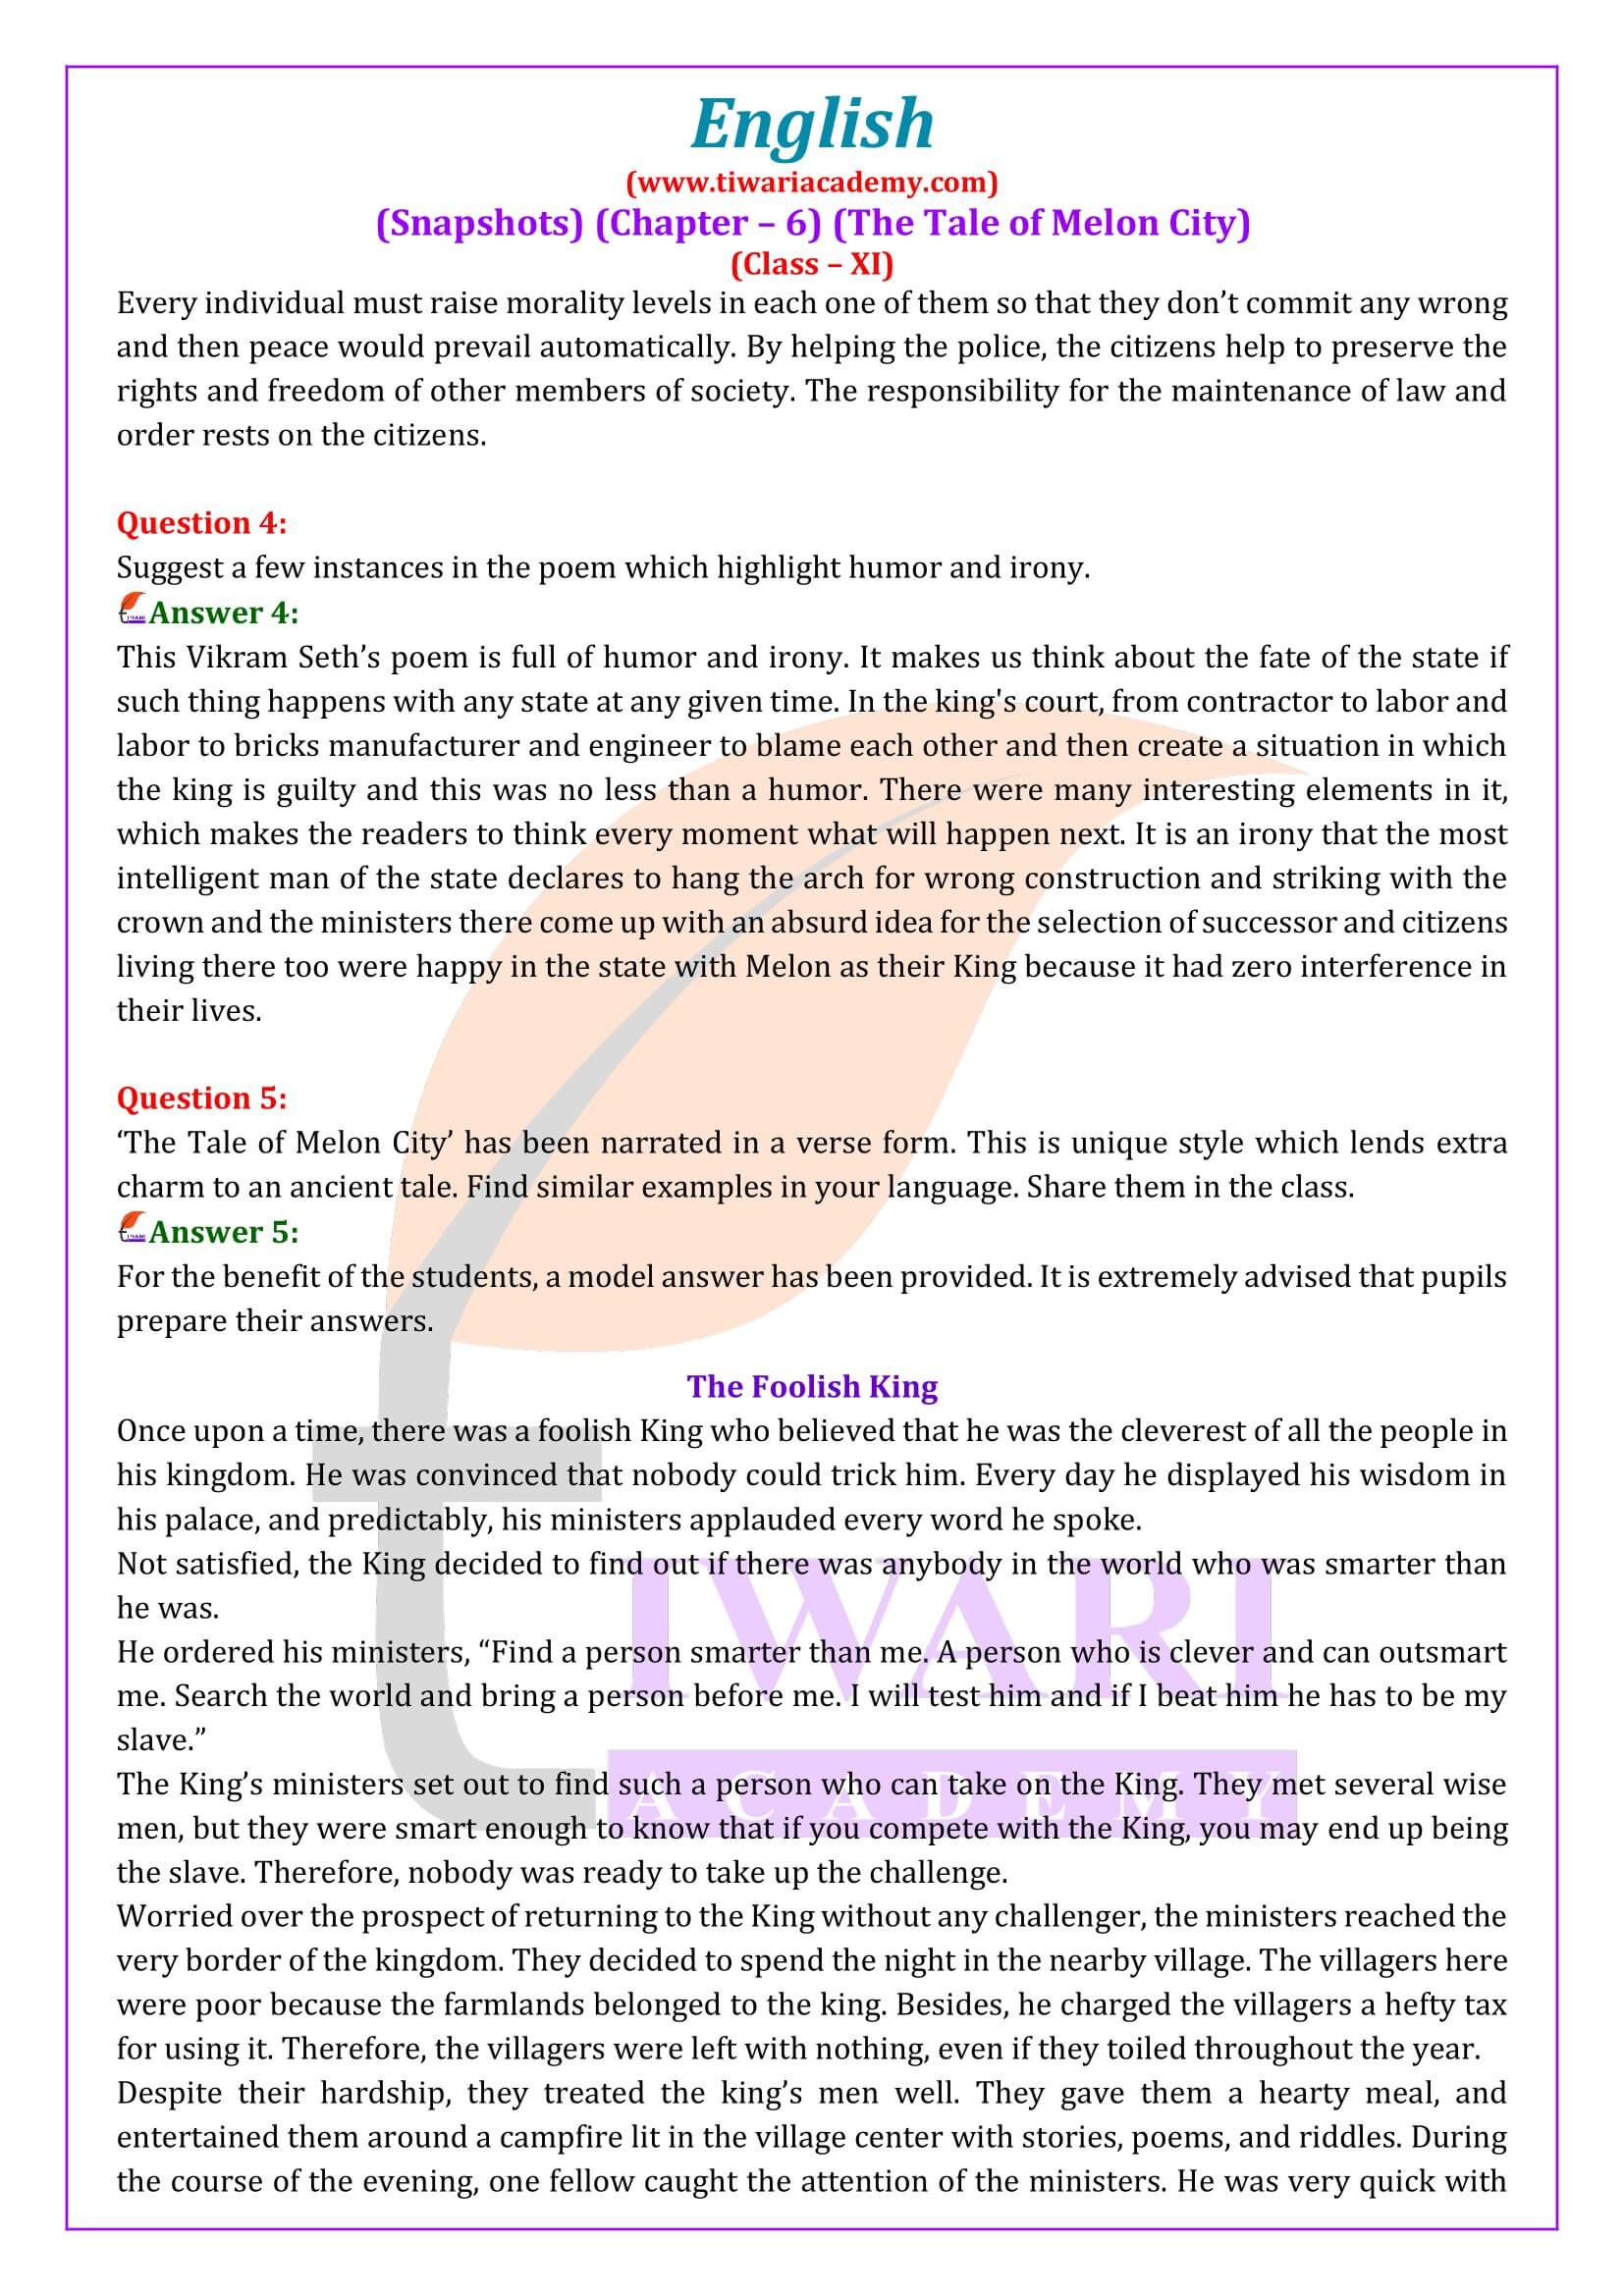 NCERT Solutions for Class 11 English Snapshots Chapter 6